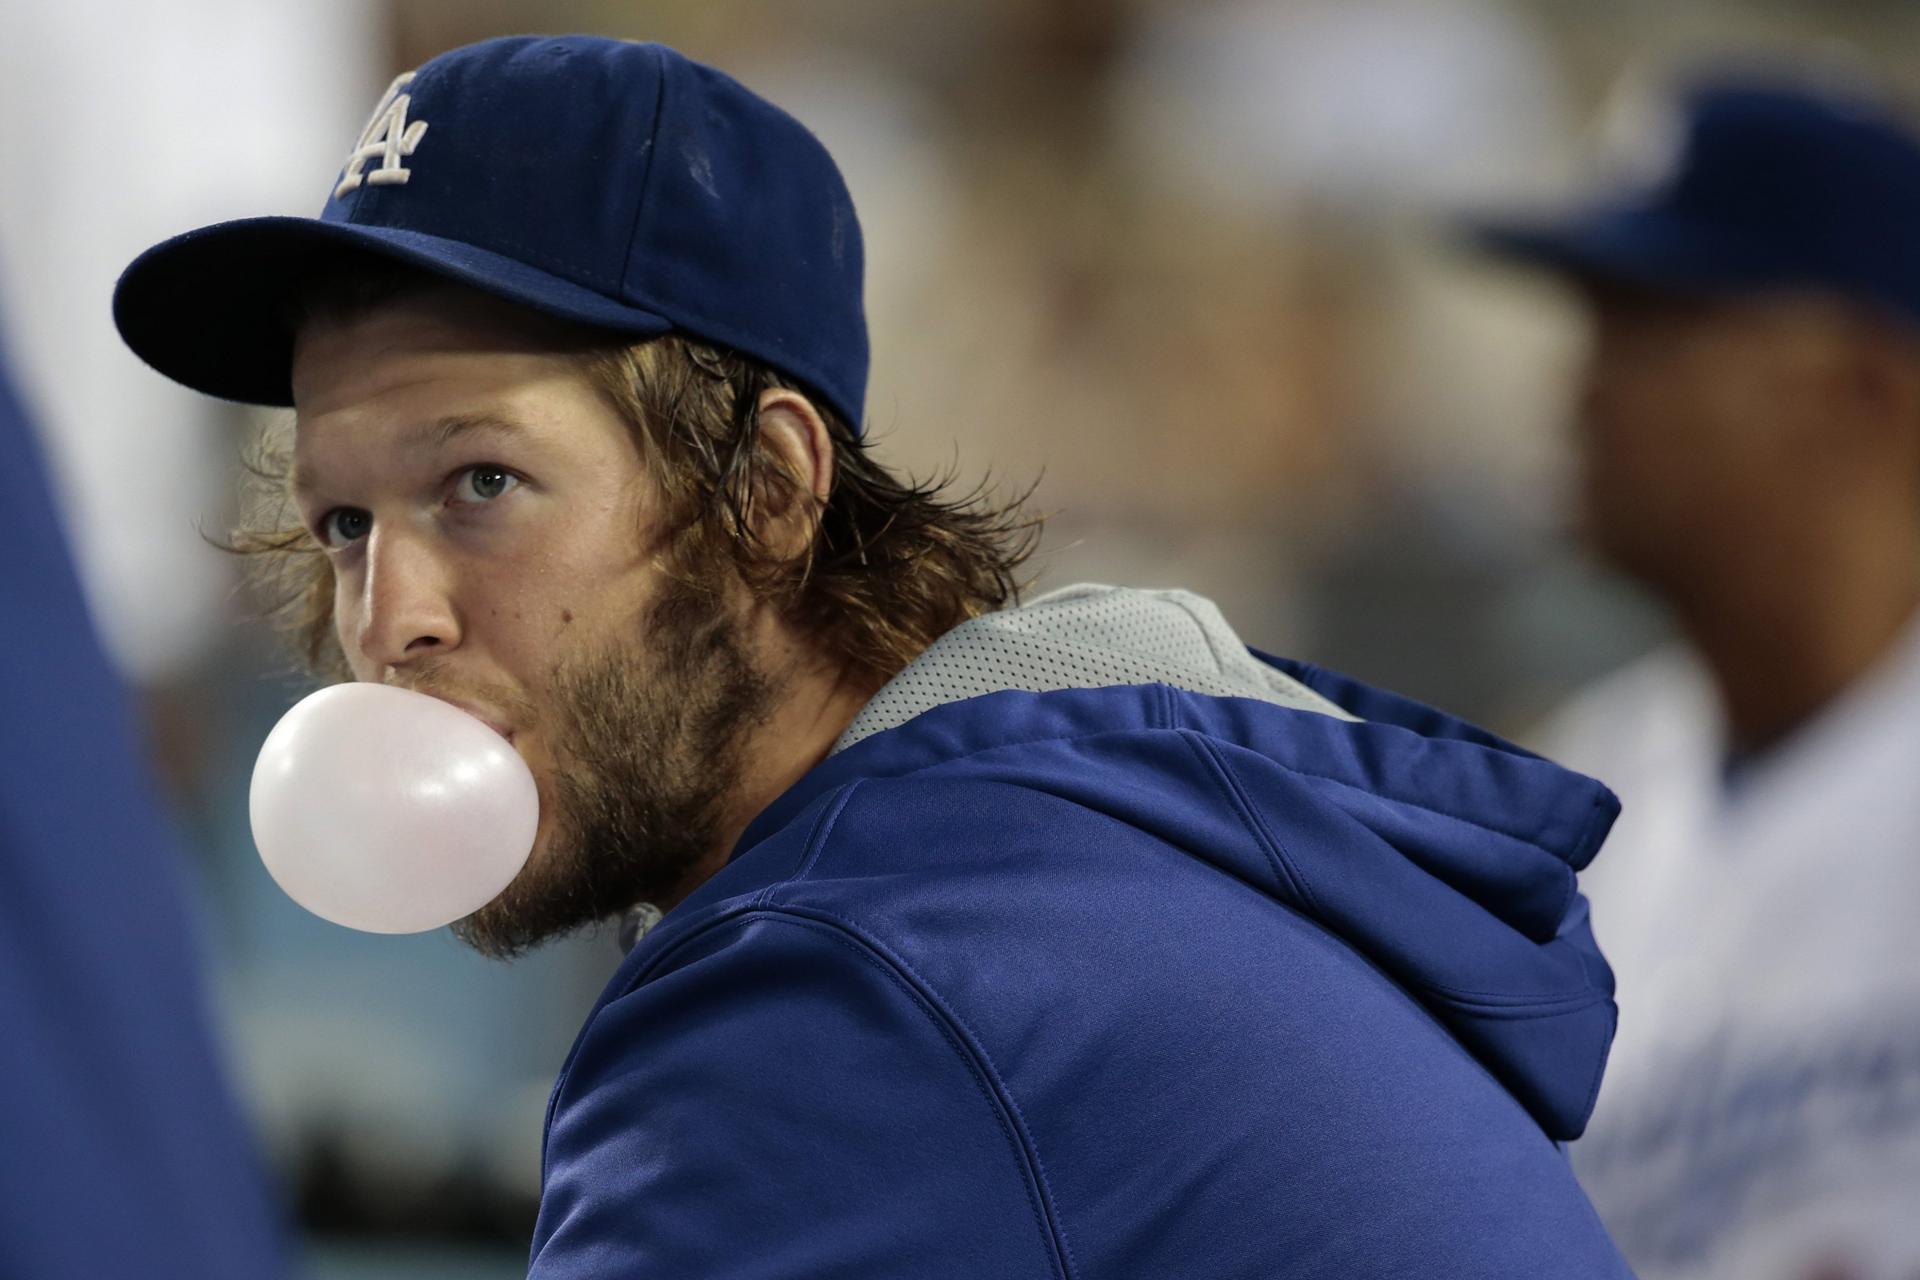 Big things are expected post-season of Cy Young winner Clayton Kershaw. Photo: MCT